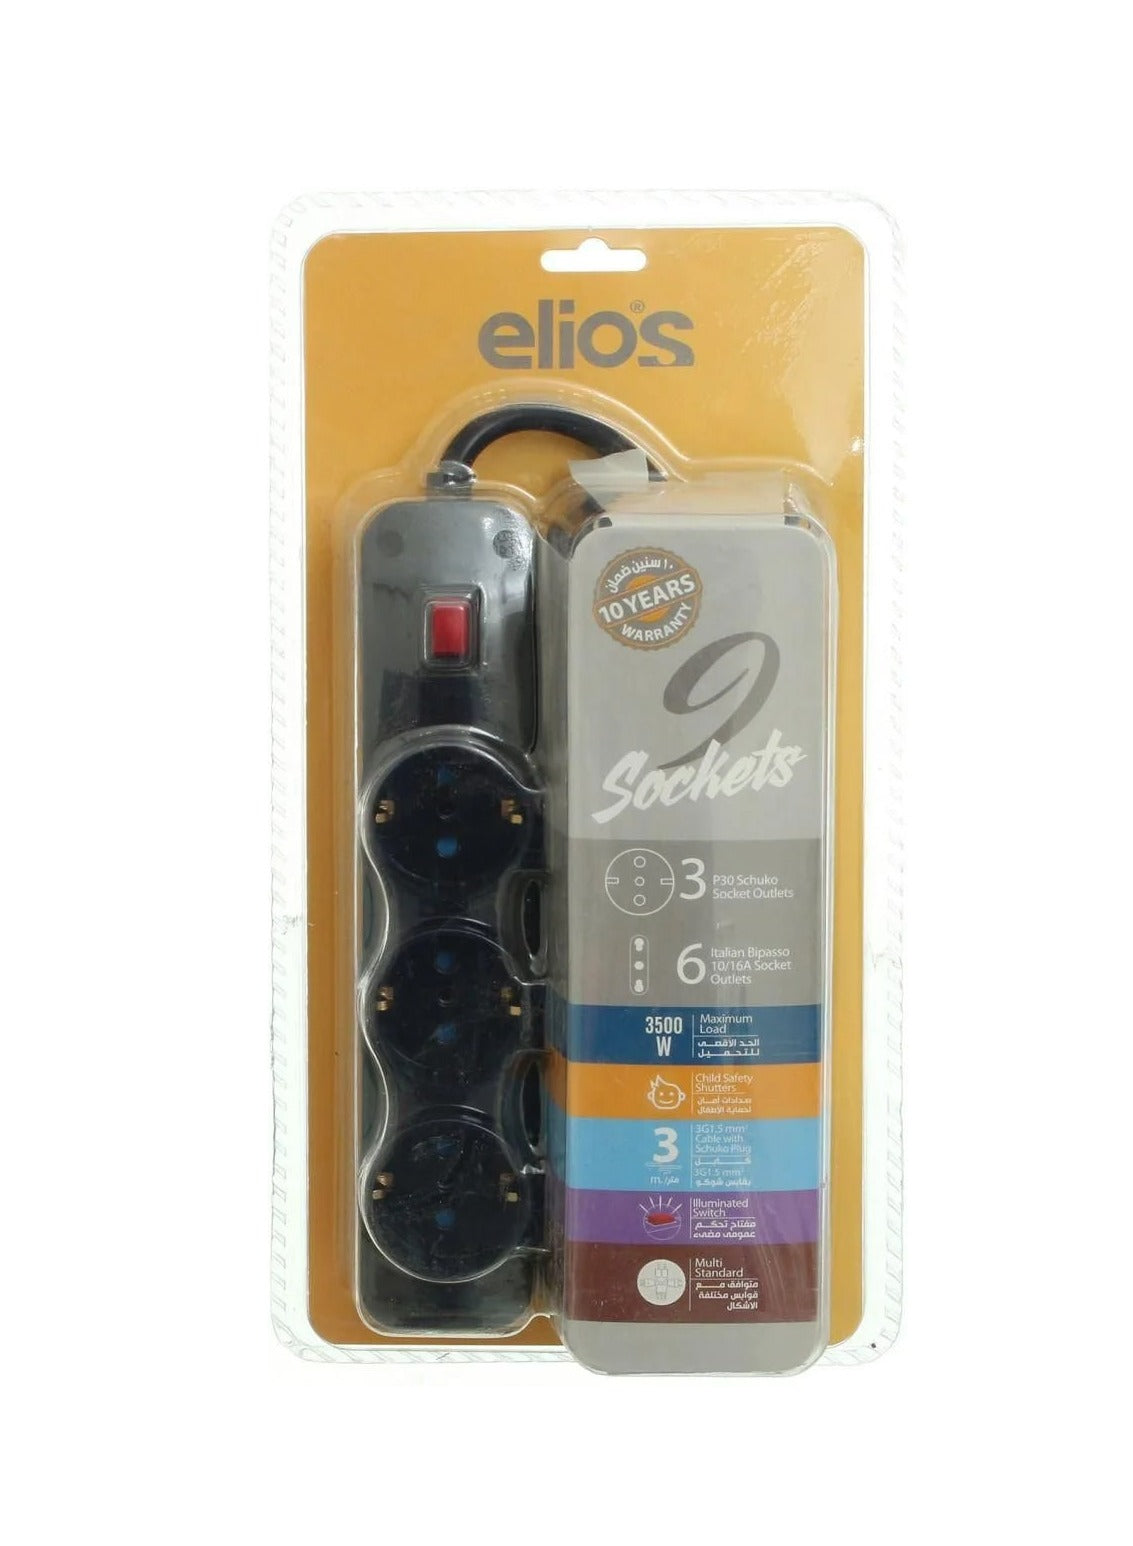 Elios Electric Power Outlets Sockets power strip with 9 outlets - Black